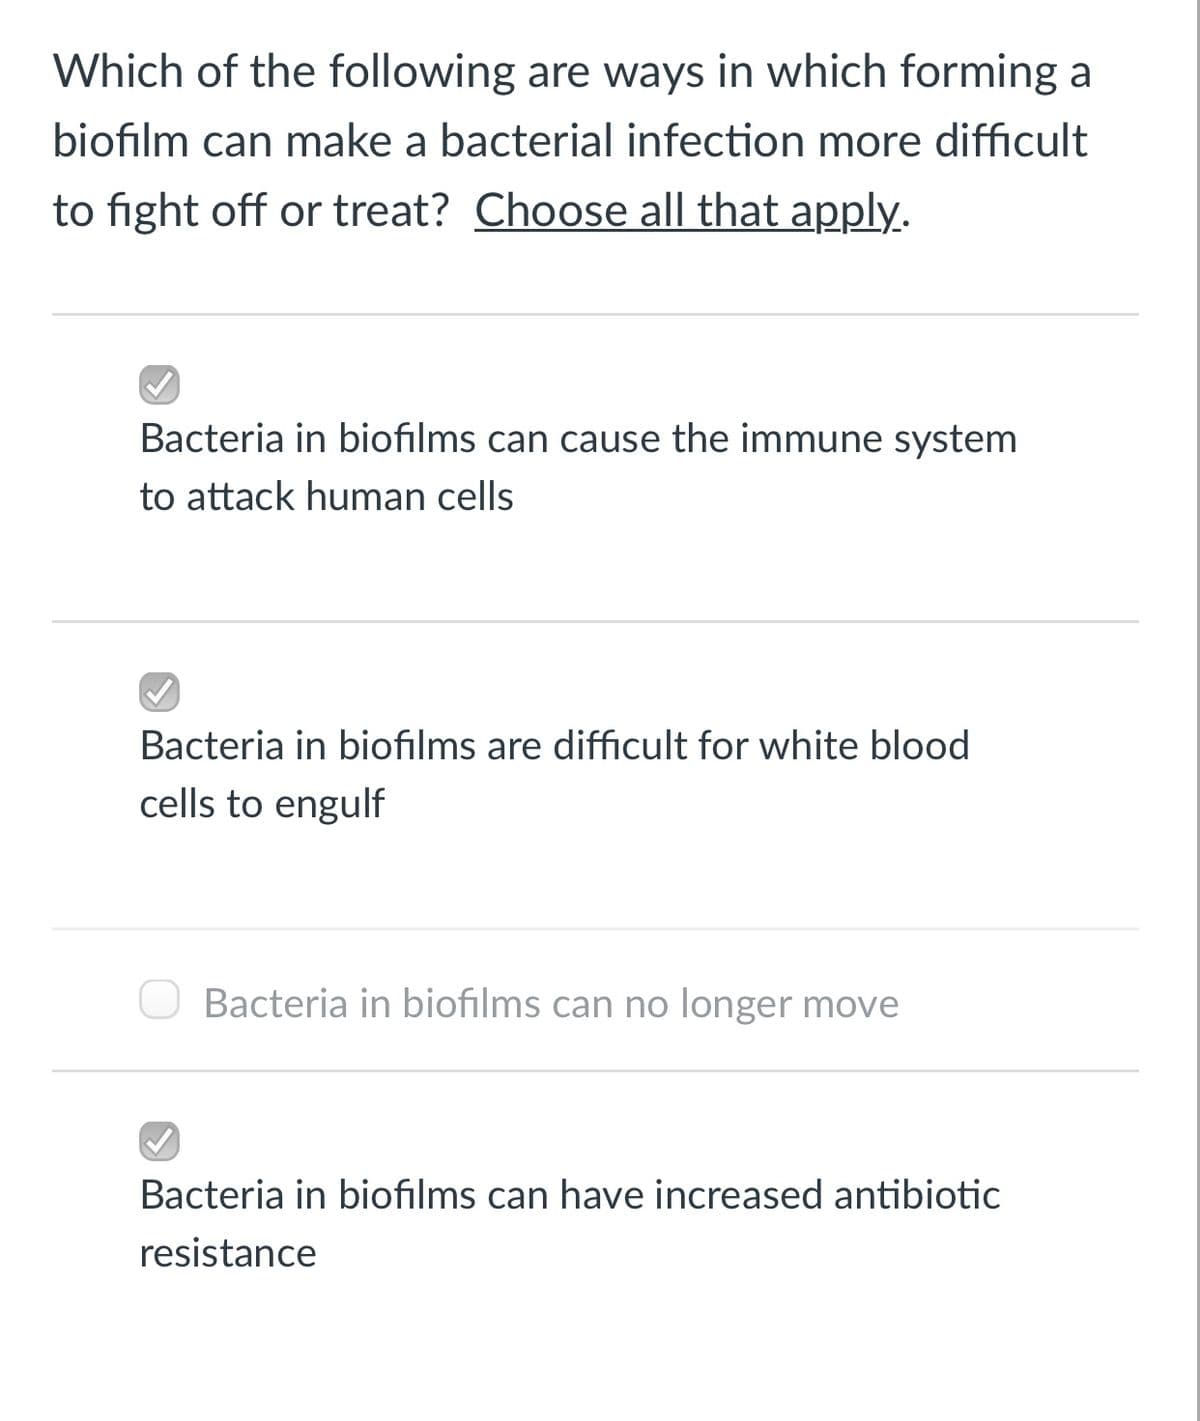 Which of the following are ways in which forming a
biofilm can make a bacterial infection more difficult
to fight off or treat? Choose all that apply.
Bacteria in biofilms can cause the immune system
to attack human cells
Bacteria in biofilms are difficult for white blood
cells to engulf
Bacteria in biofilms can no longer move
Bacteria in biofilms can have increased antibiotic
resistance
